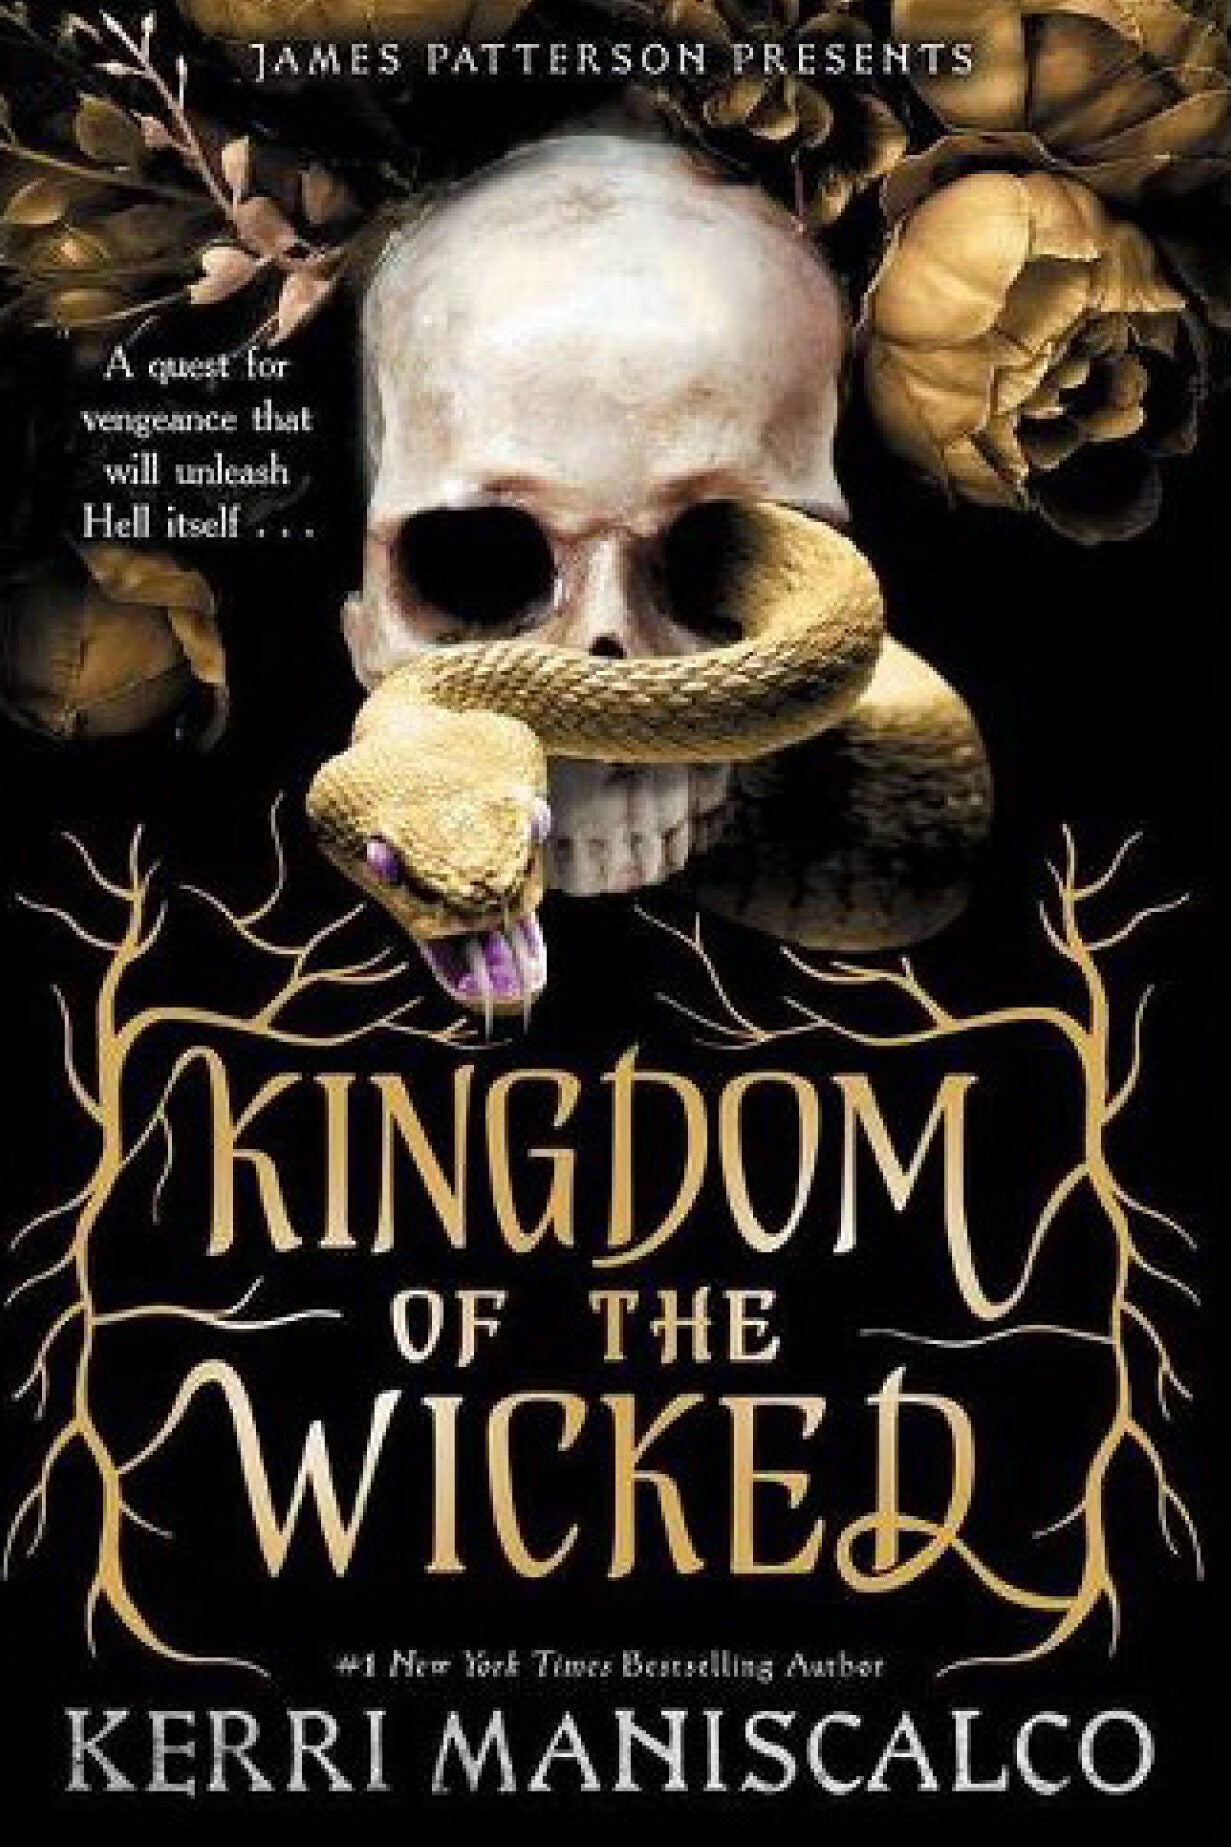 Book cover: "Kingdom of the Wicked."